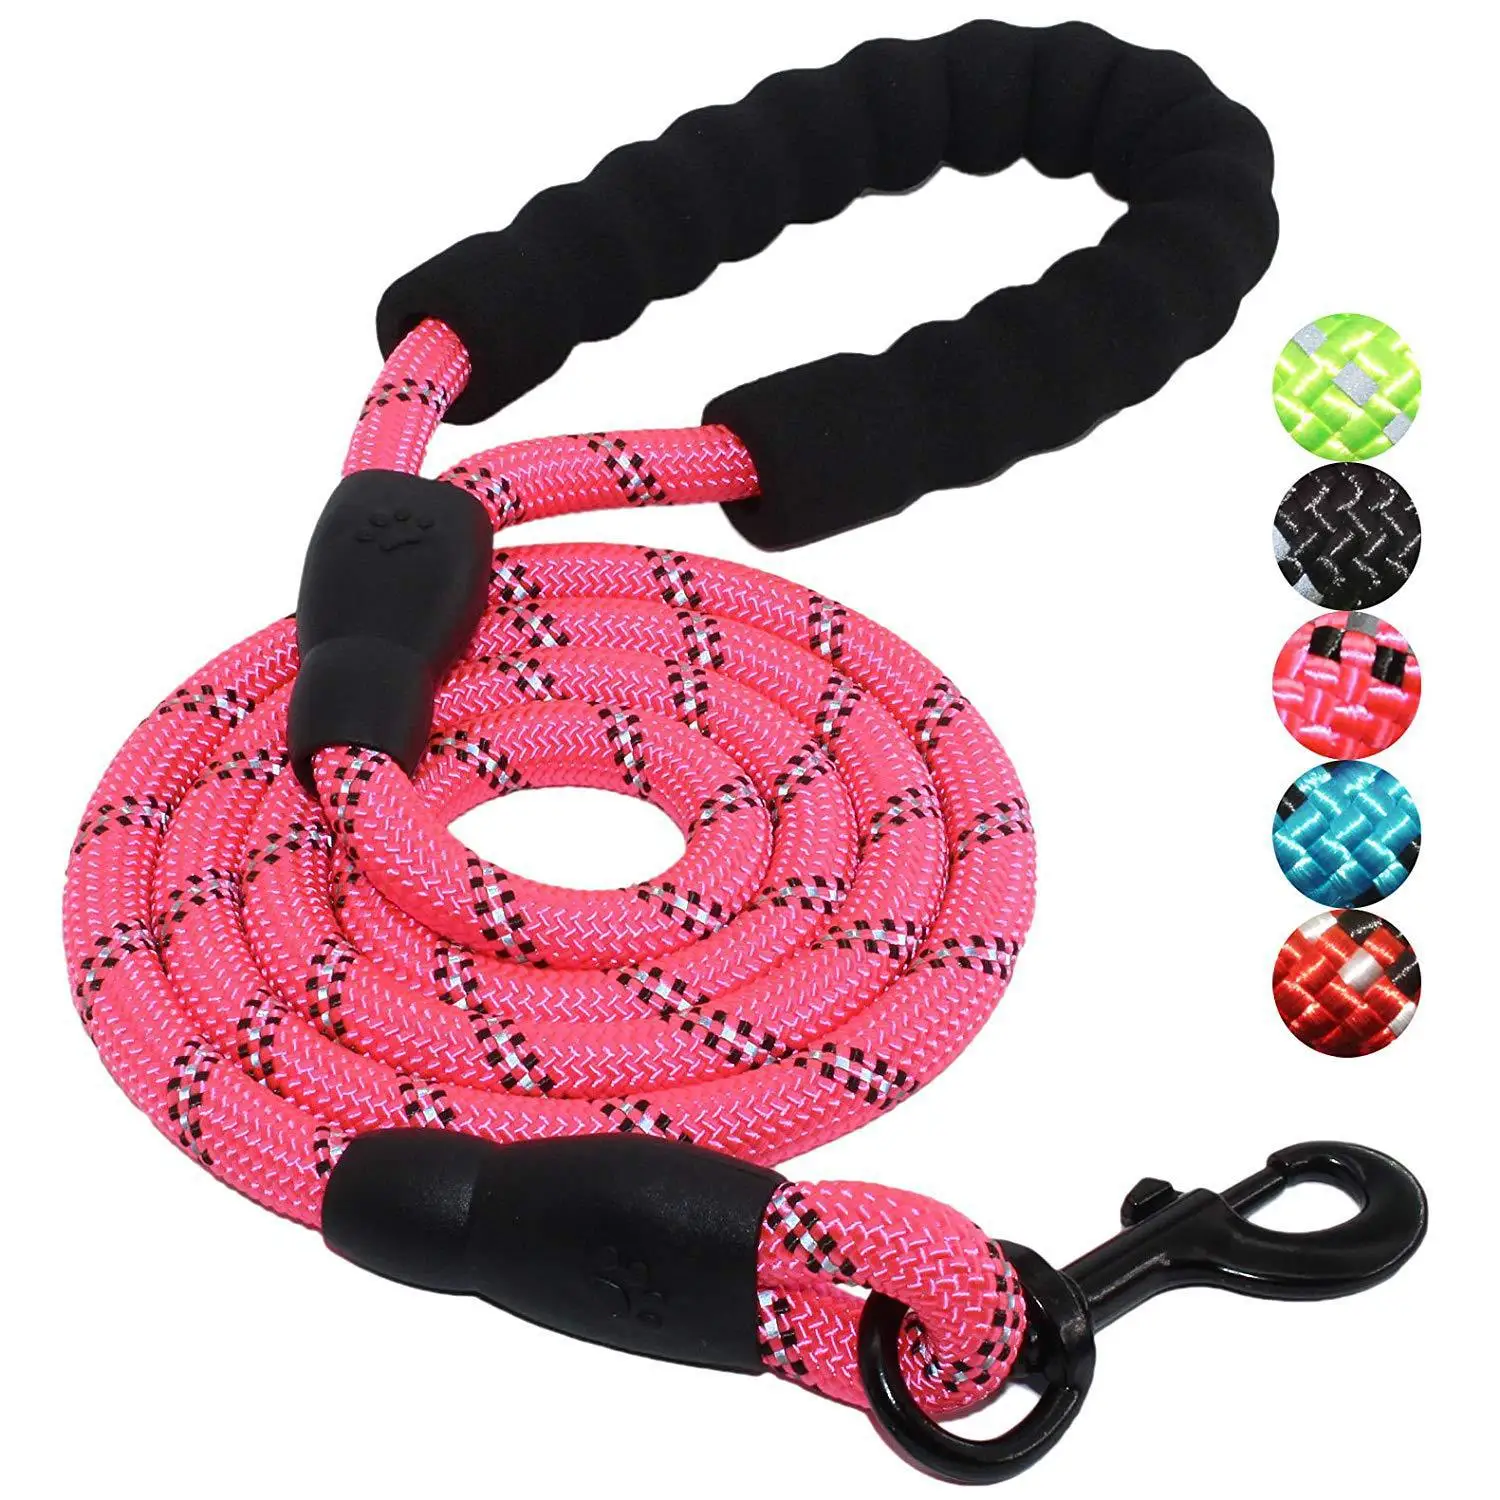 

Highly Reflective Threads Strong Pet Walking Training Dog Leash with Comfortable Padded Handle, Black,coffee, purple, orange, green